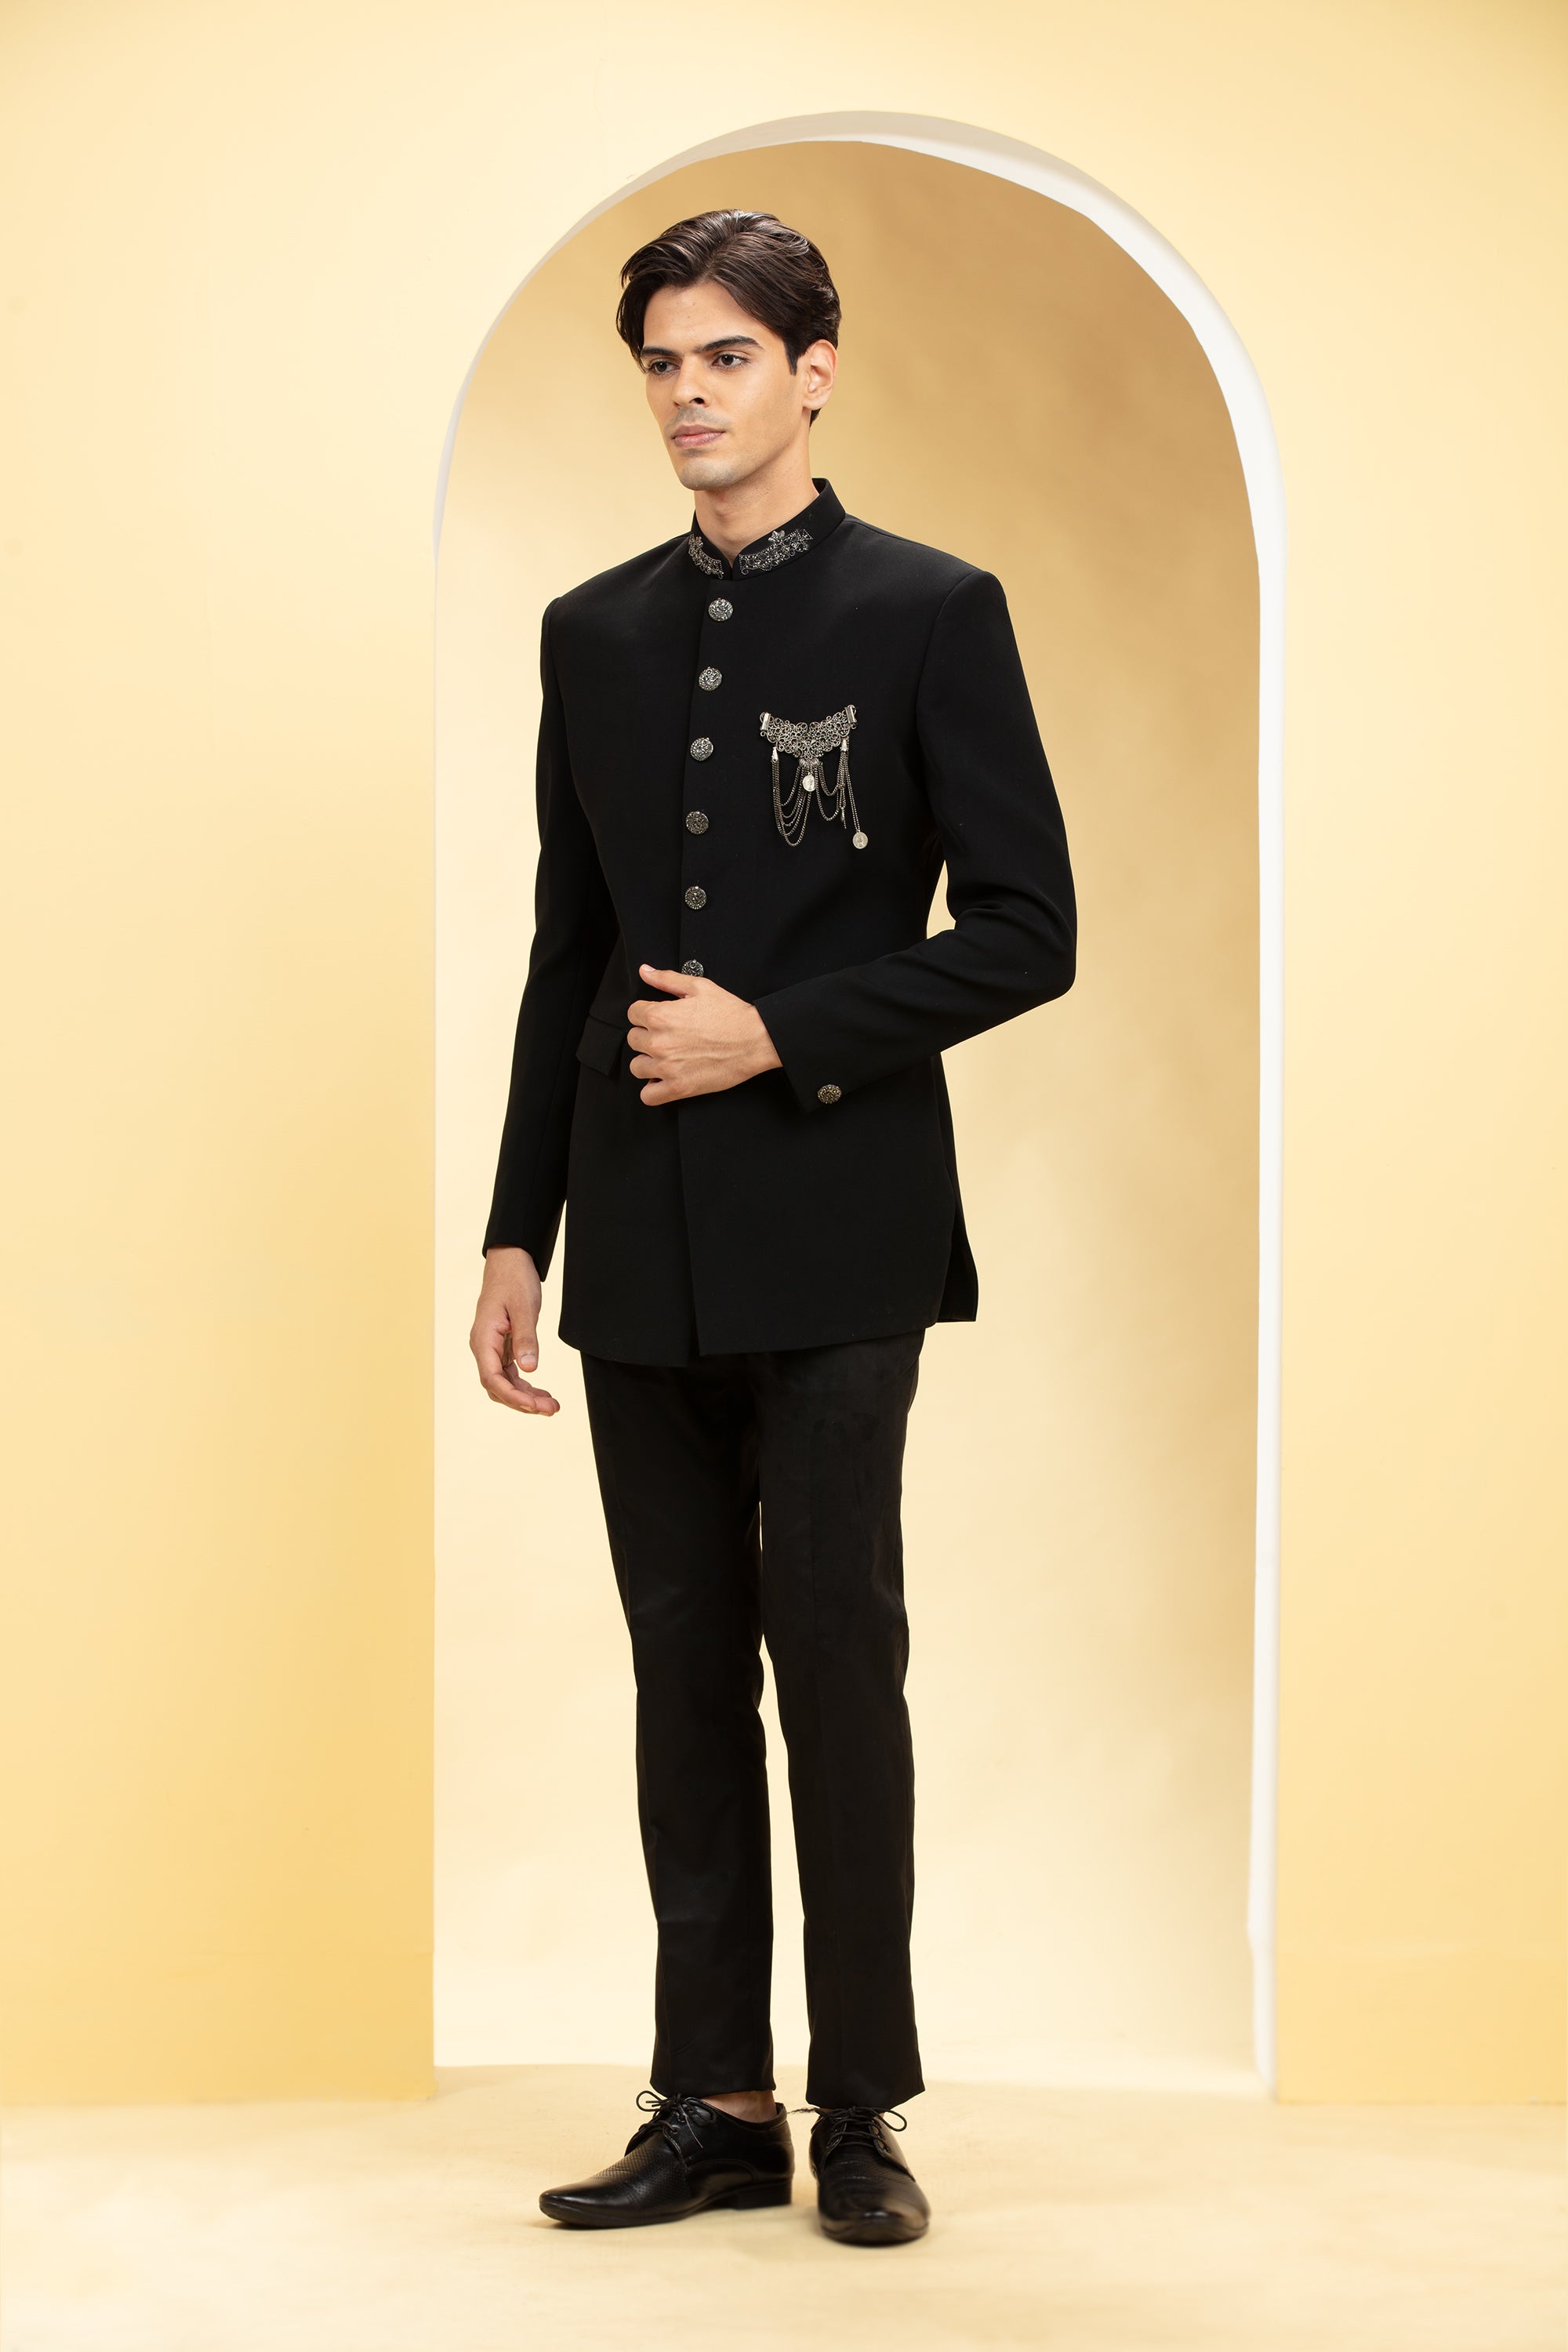 Jet Black Suede Tuxedo Set with Self cutdana work and brooch